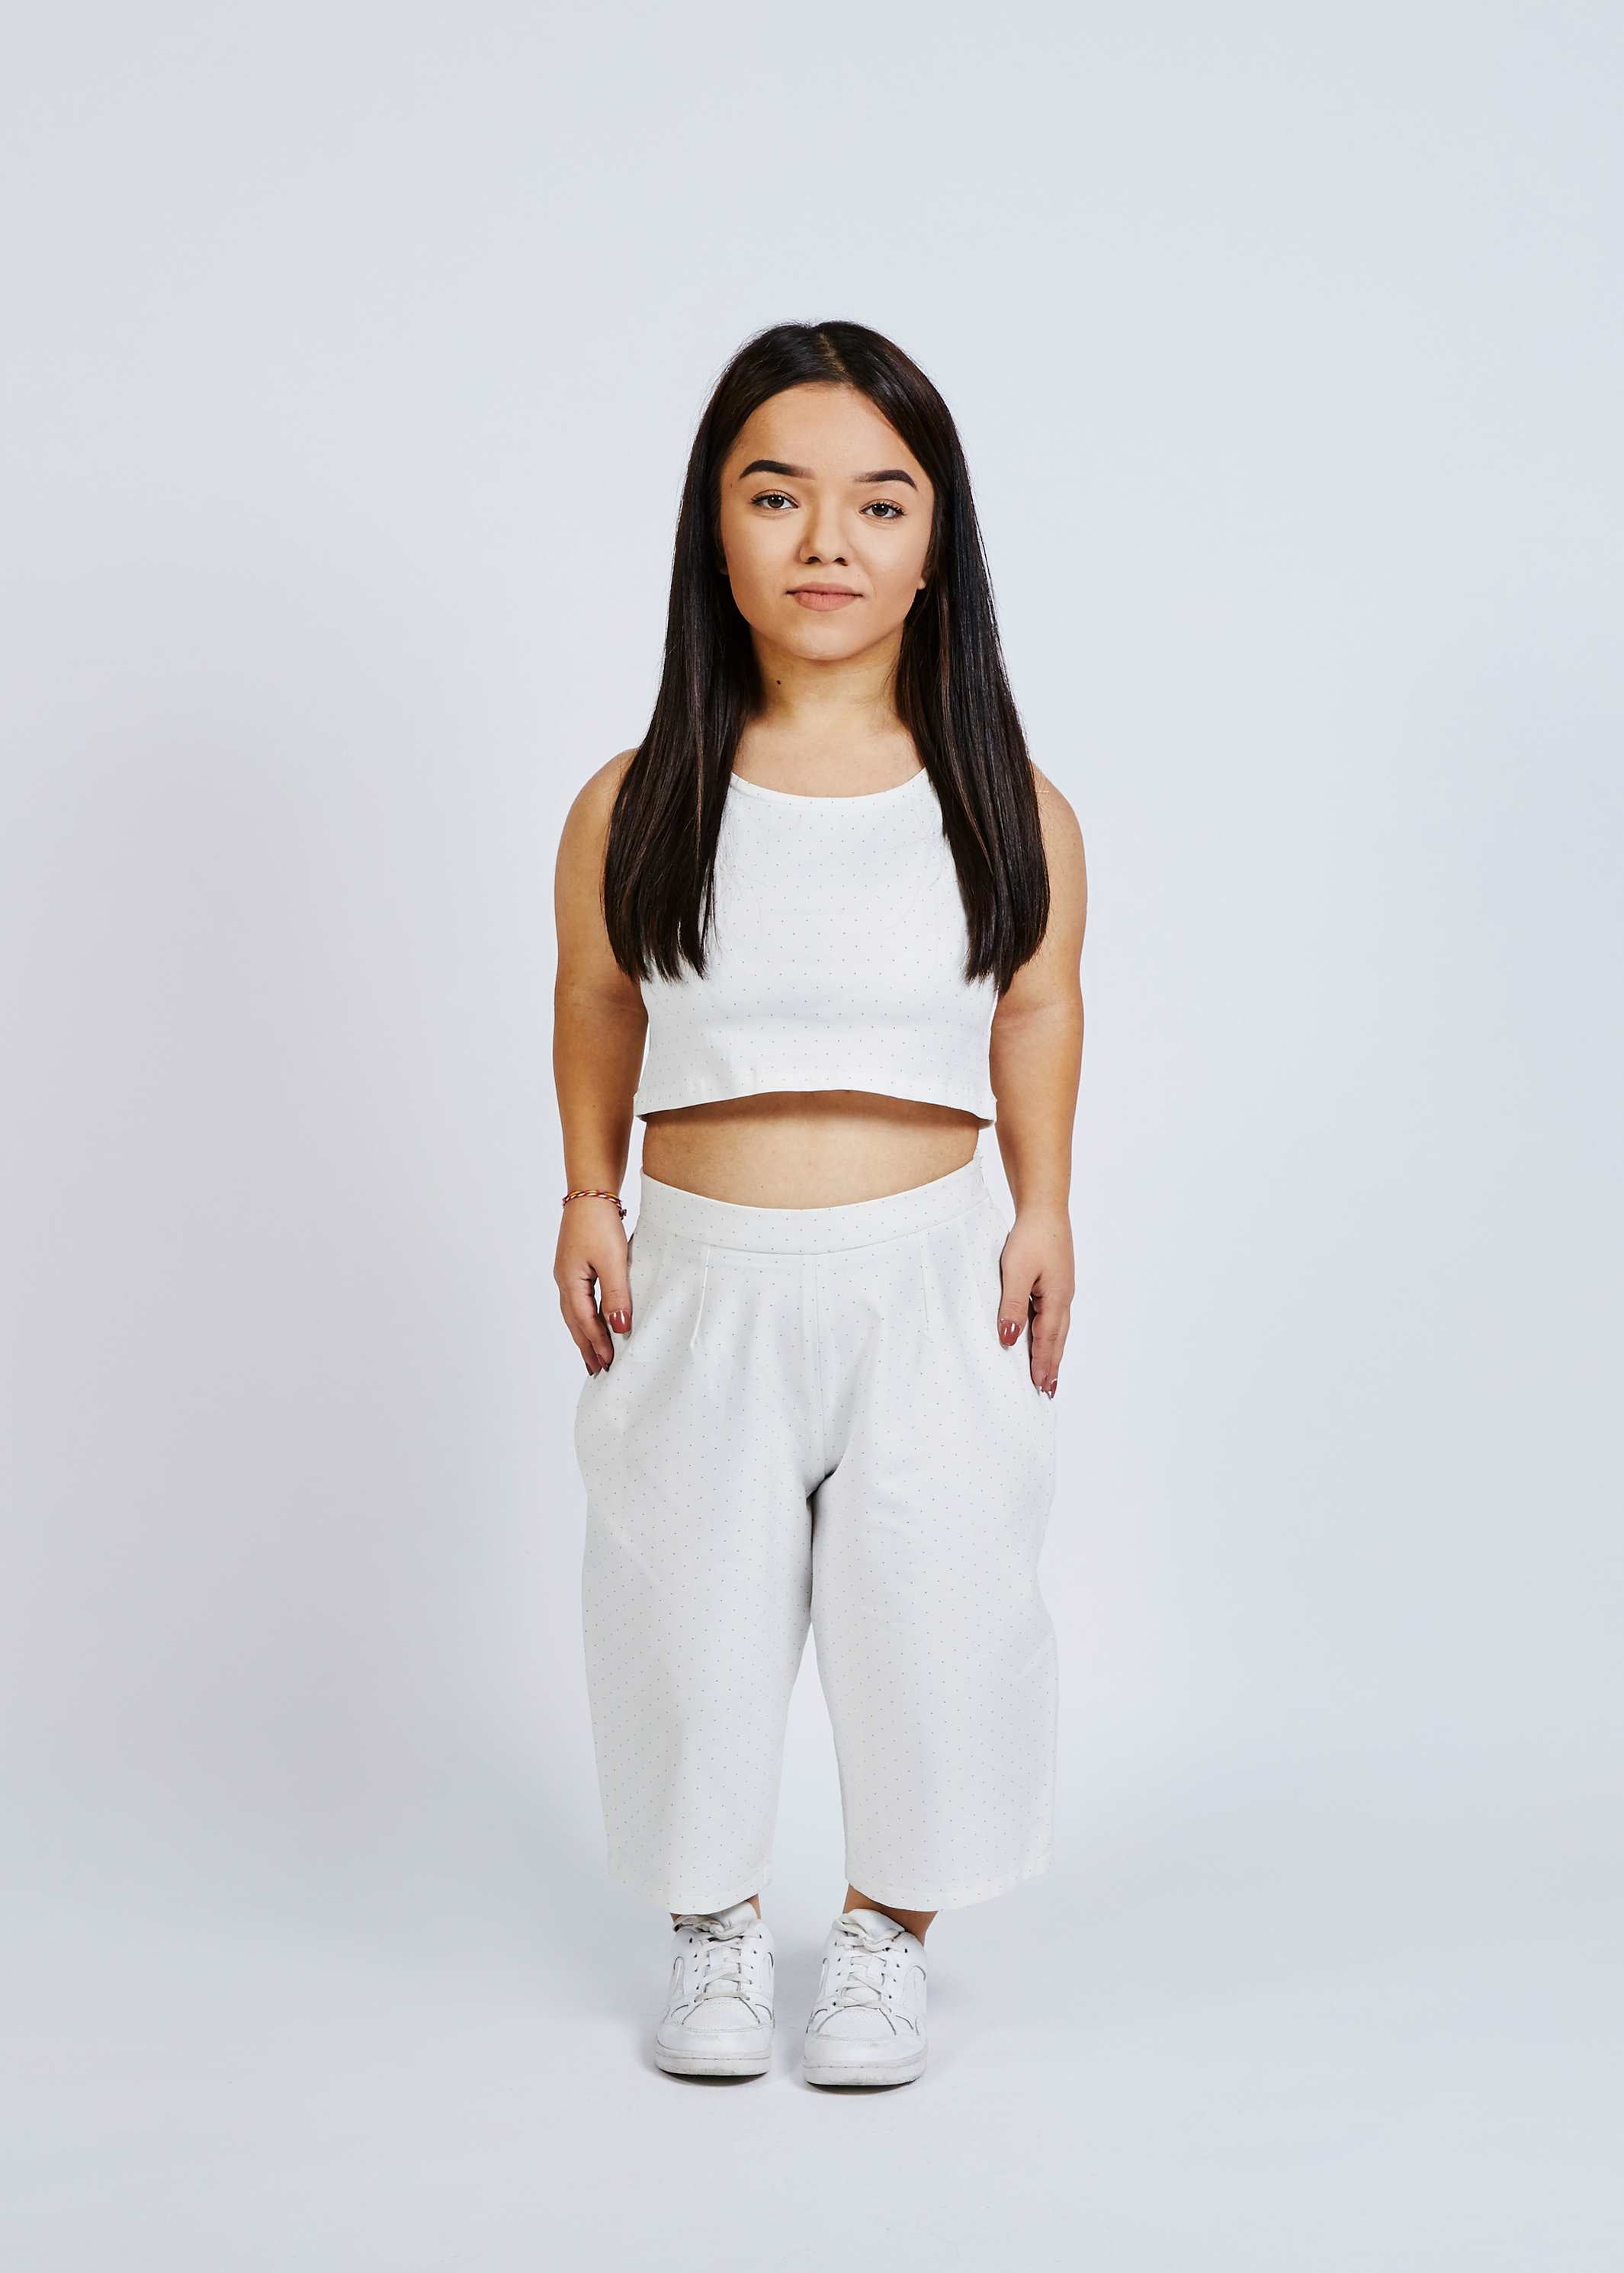 woman with dwarfism wearing white culottes with small dots and matching crop top